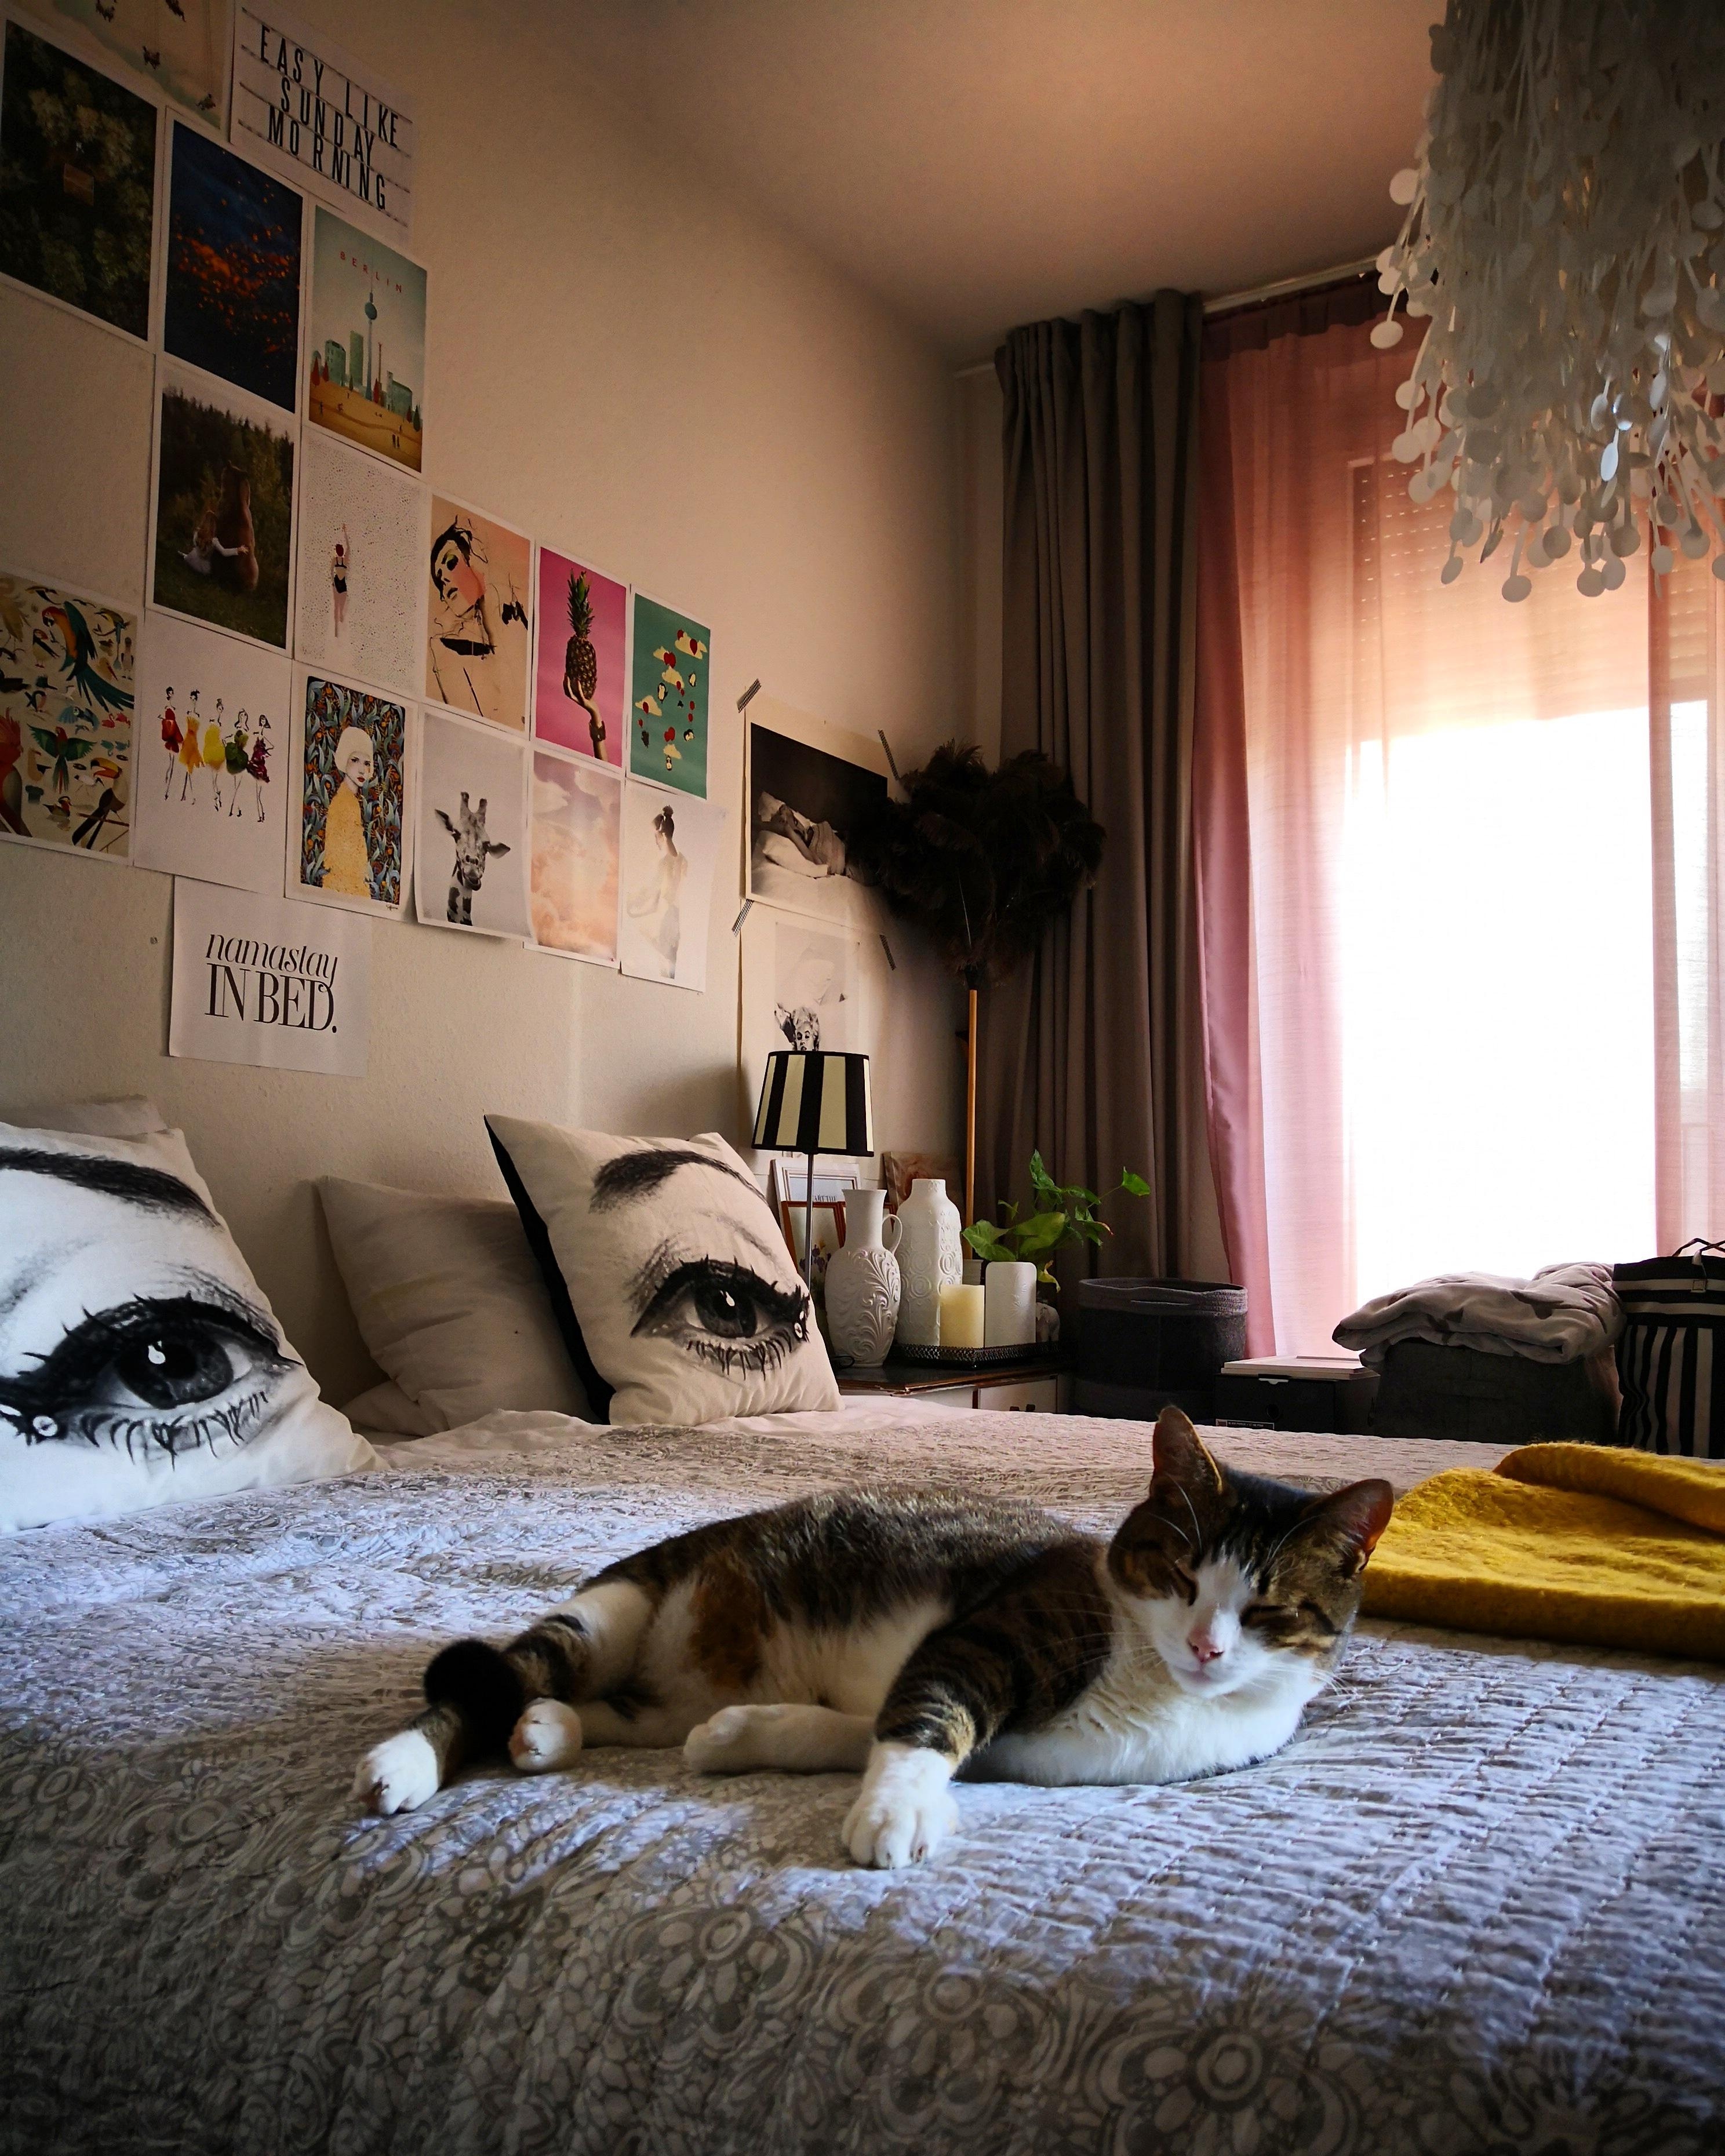 #bedroom #catcontent #lazy #chillout #home